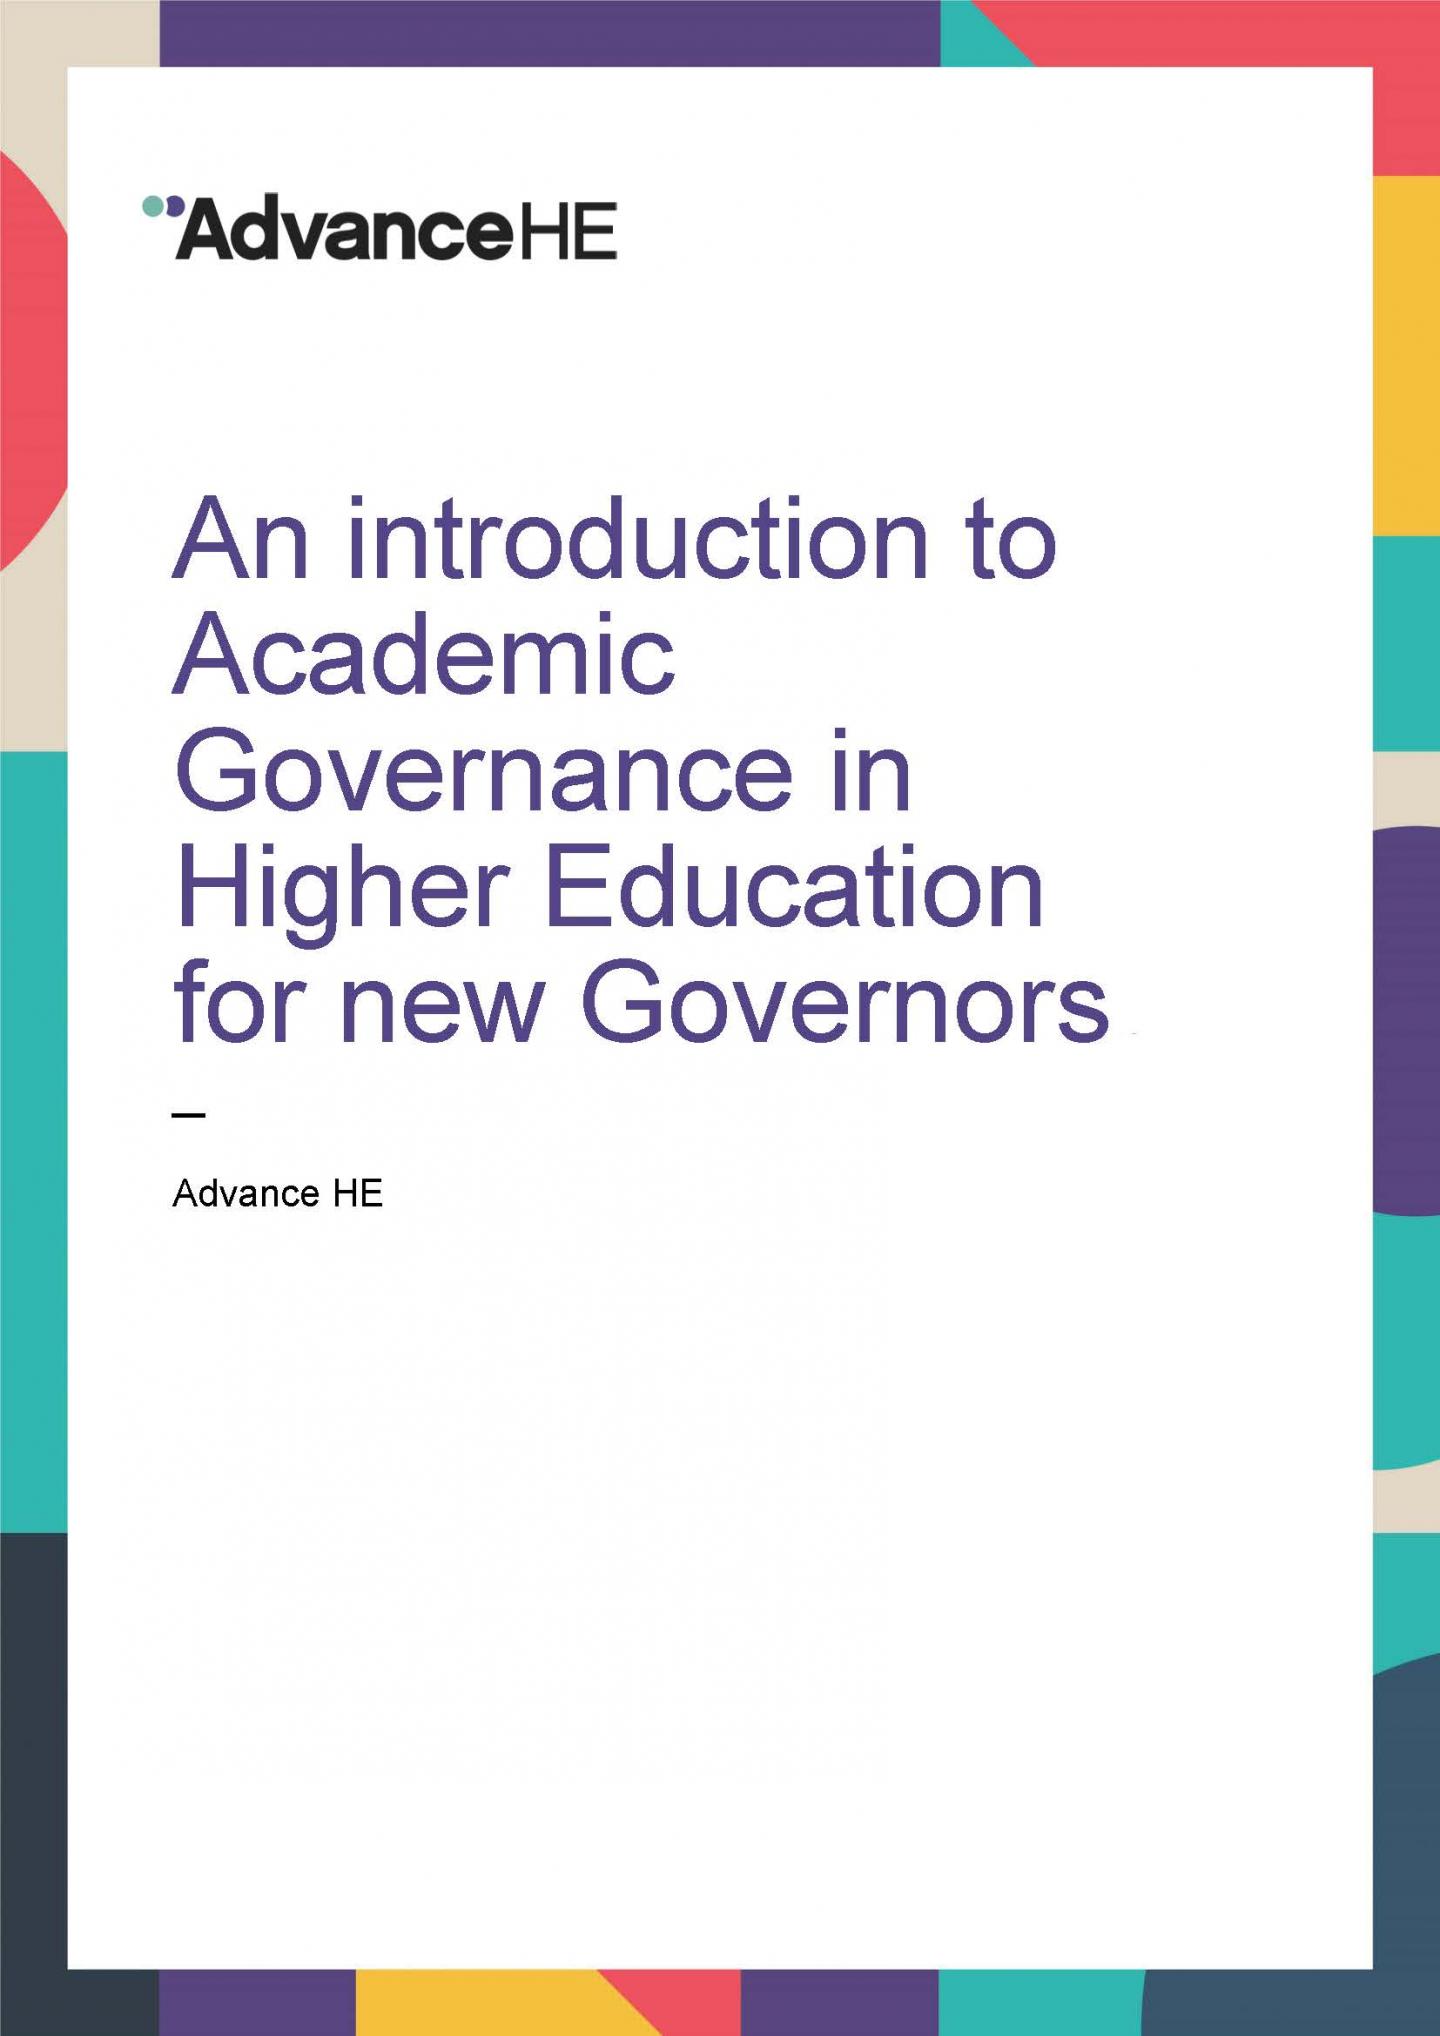 Guide to Academic Governance